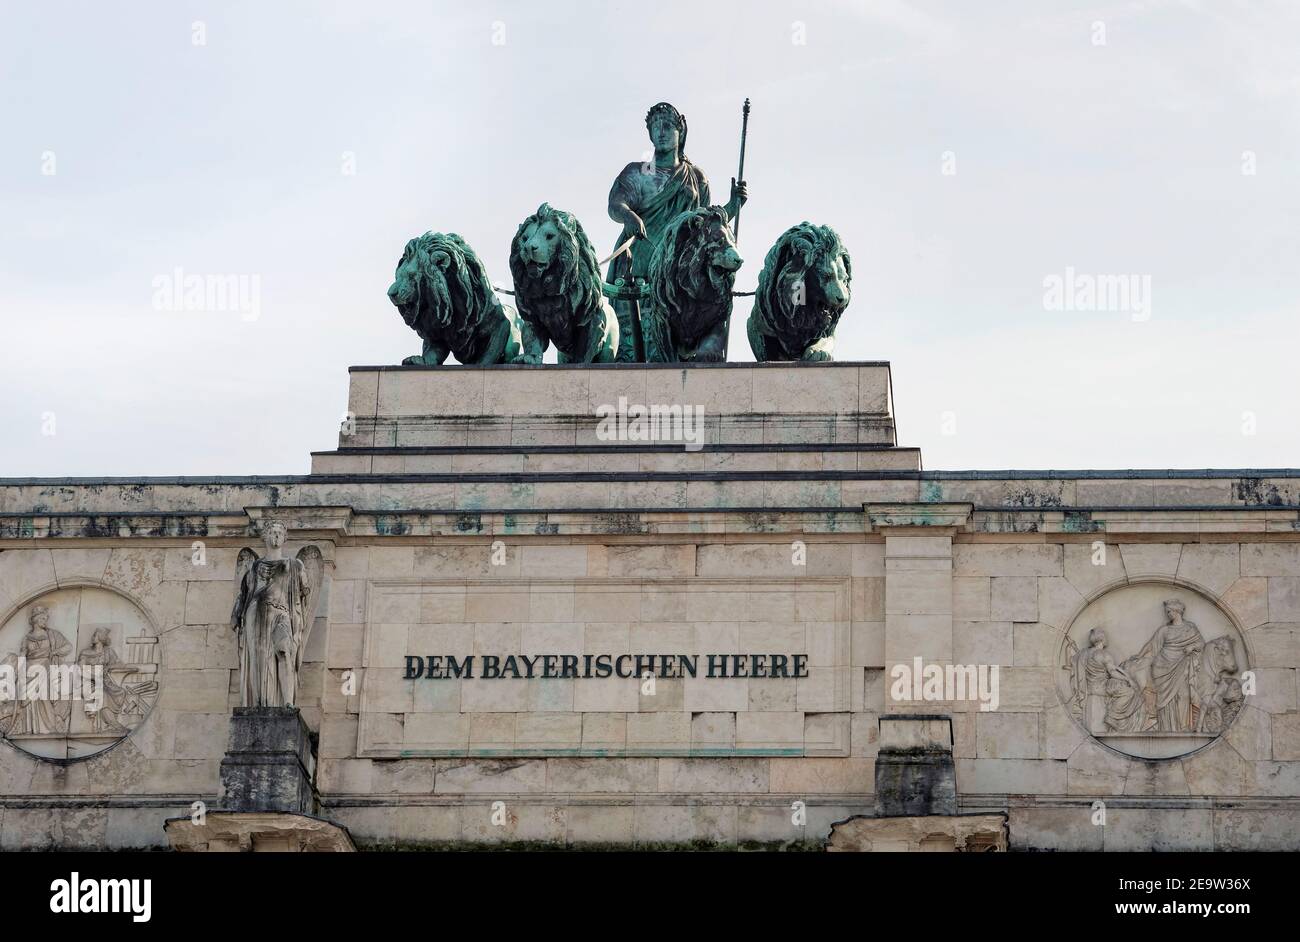 Munich-Germany, August 8, 2019: The Siegestor (Victory Gate) is an impressive triumphal arch in Munich. Stock Photo